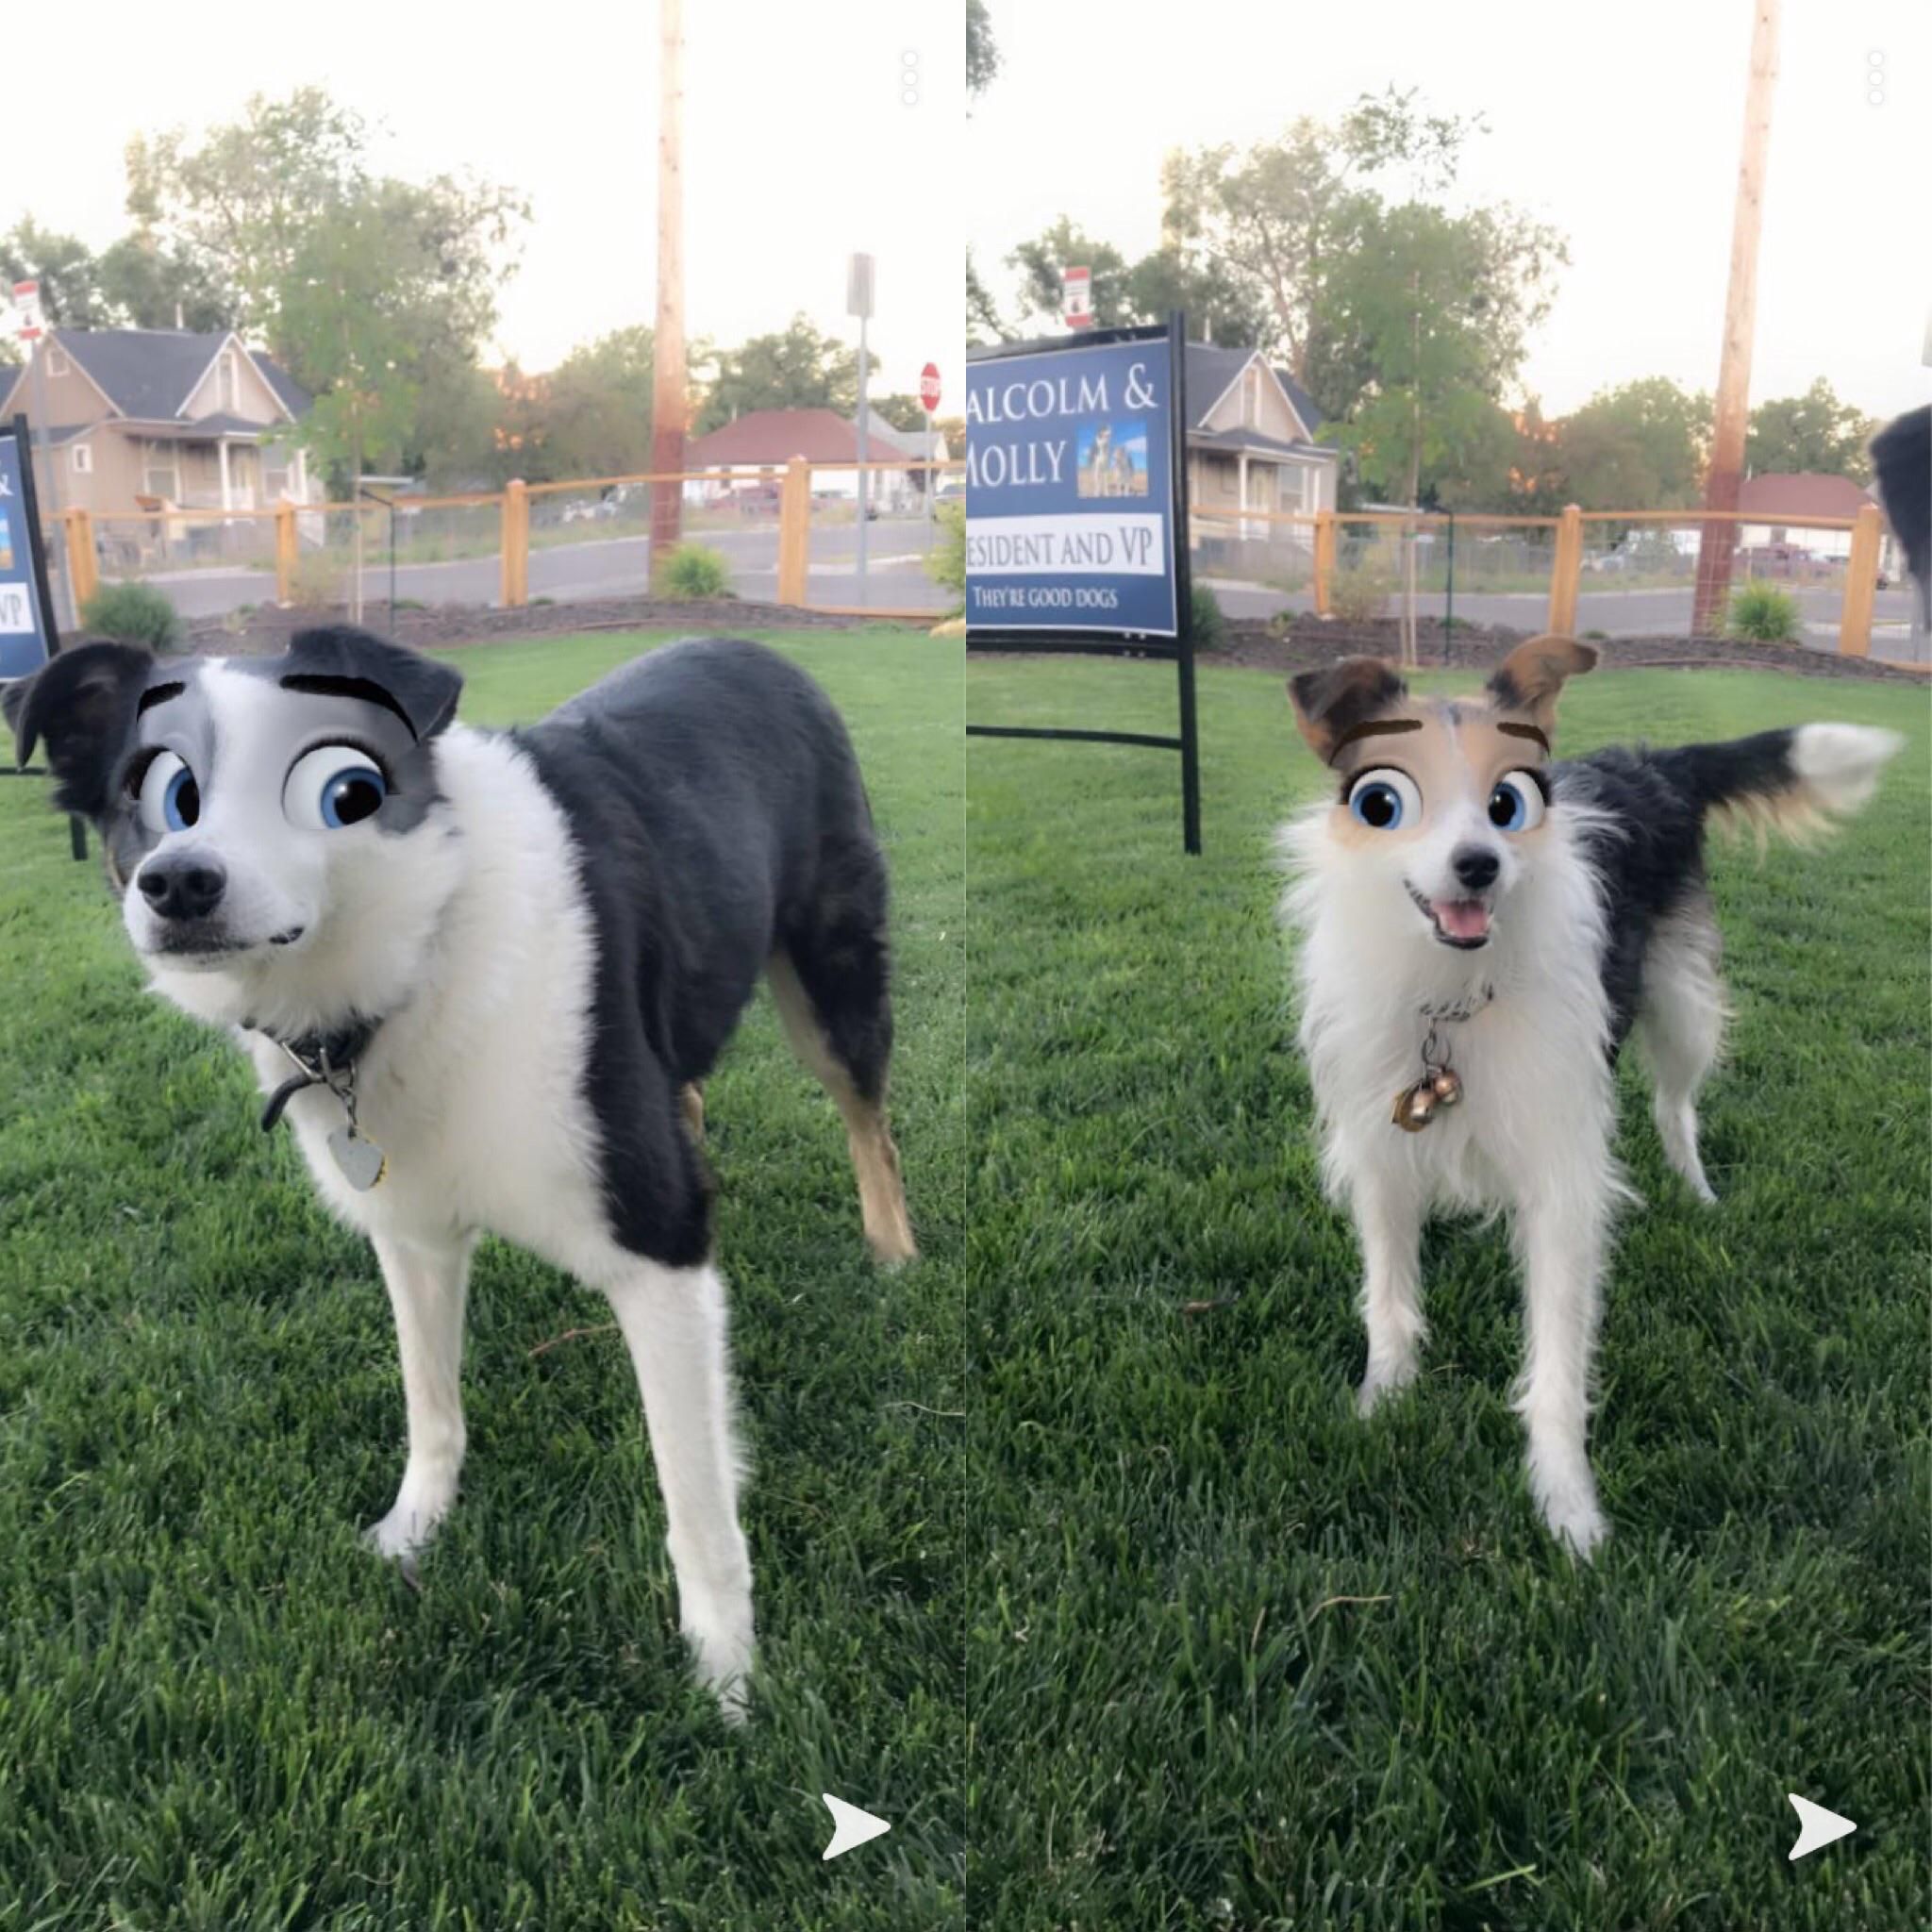 I tried a Snapchat filter on my dogs.